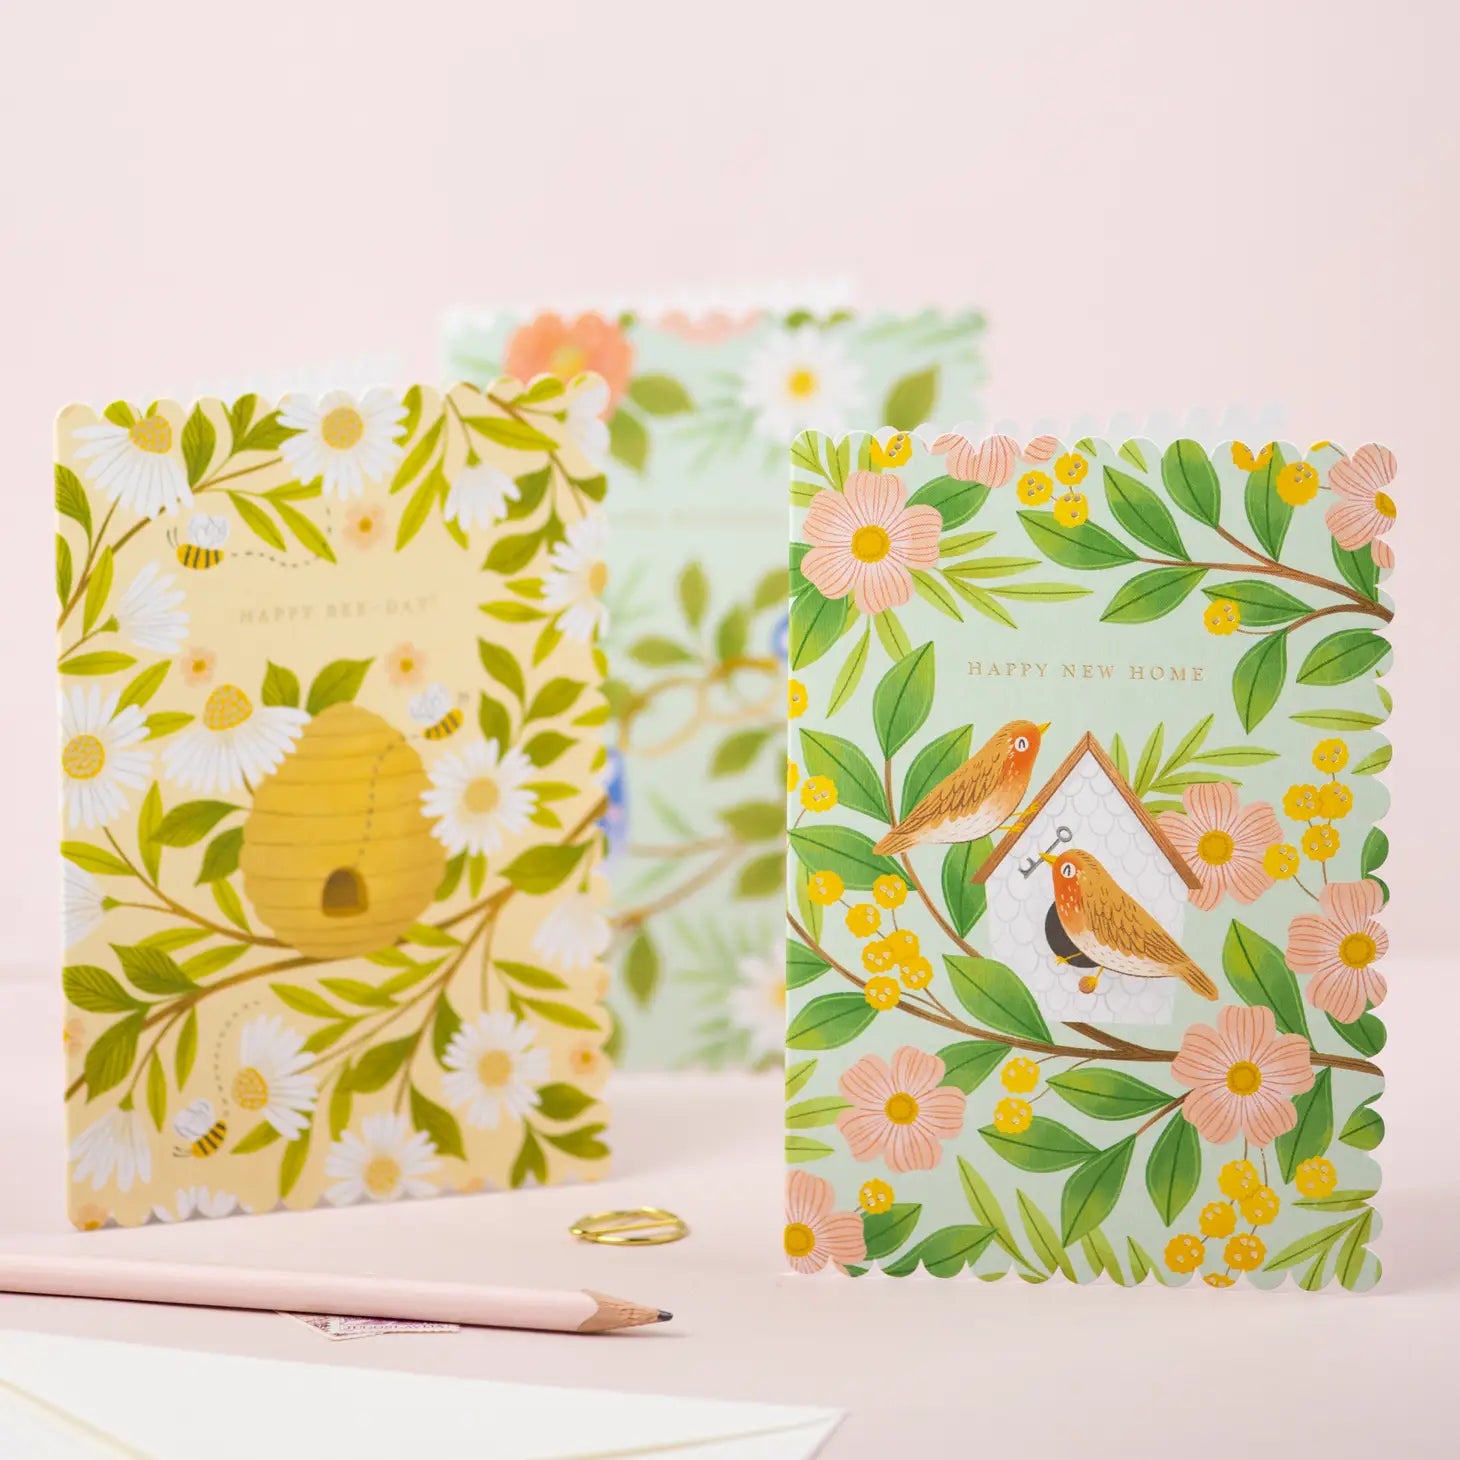 Ricicle UK Greeting Cards